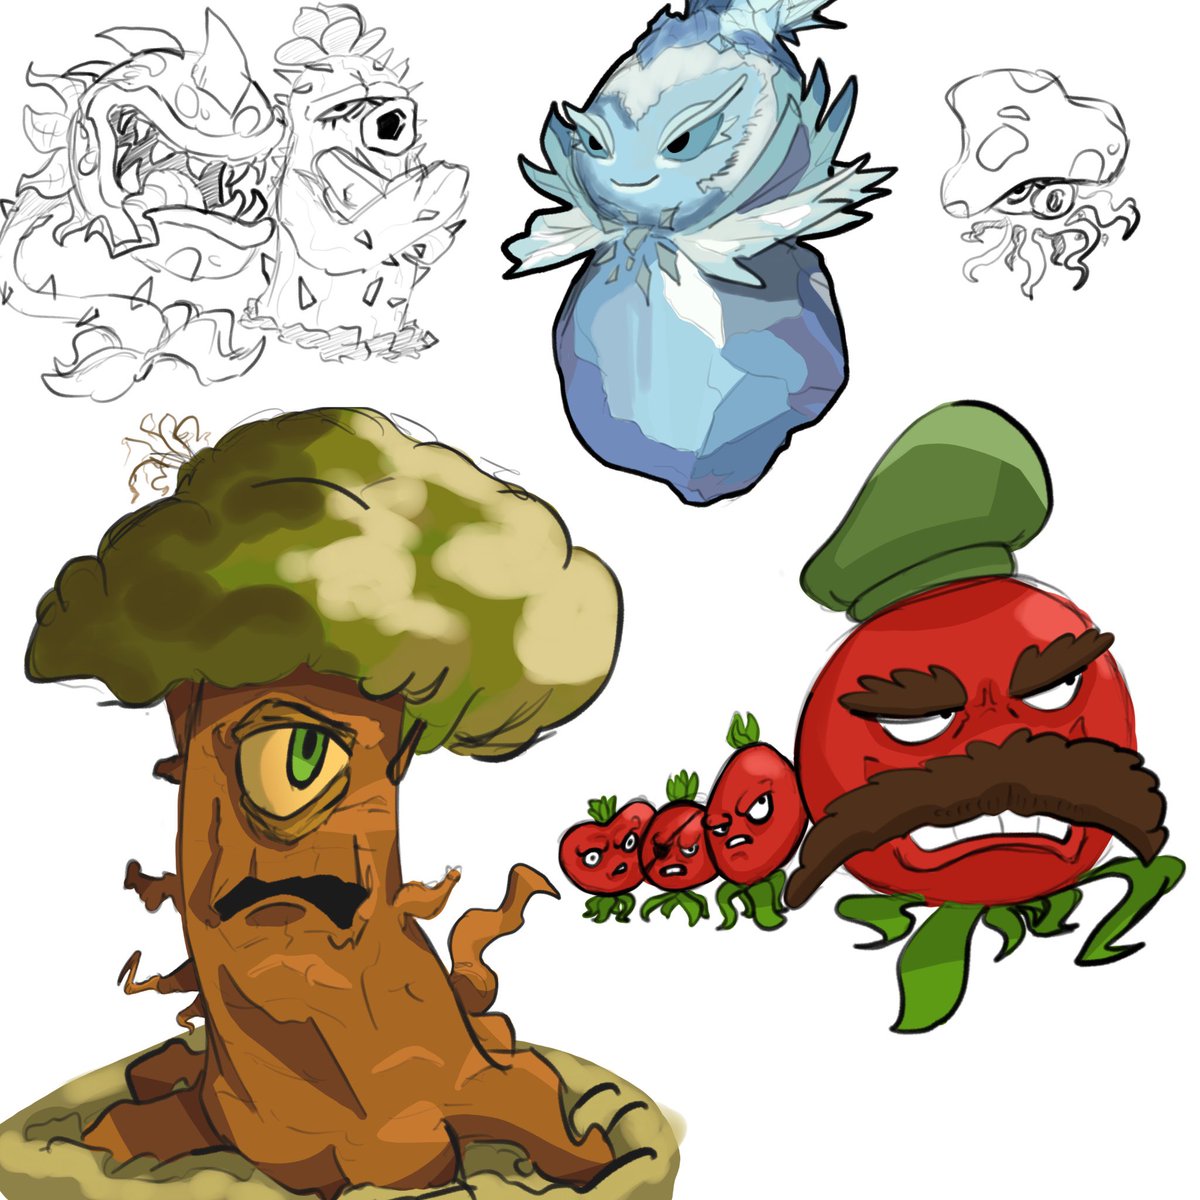 Some bfn sketches, I’ll never forget you berry brigade 🫡

#plantsvszombies